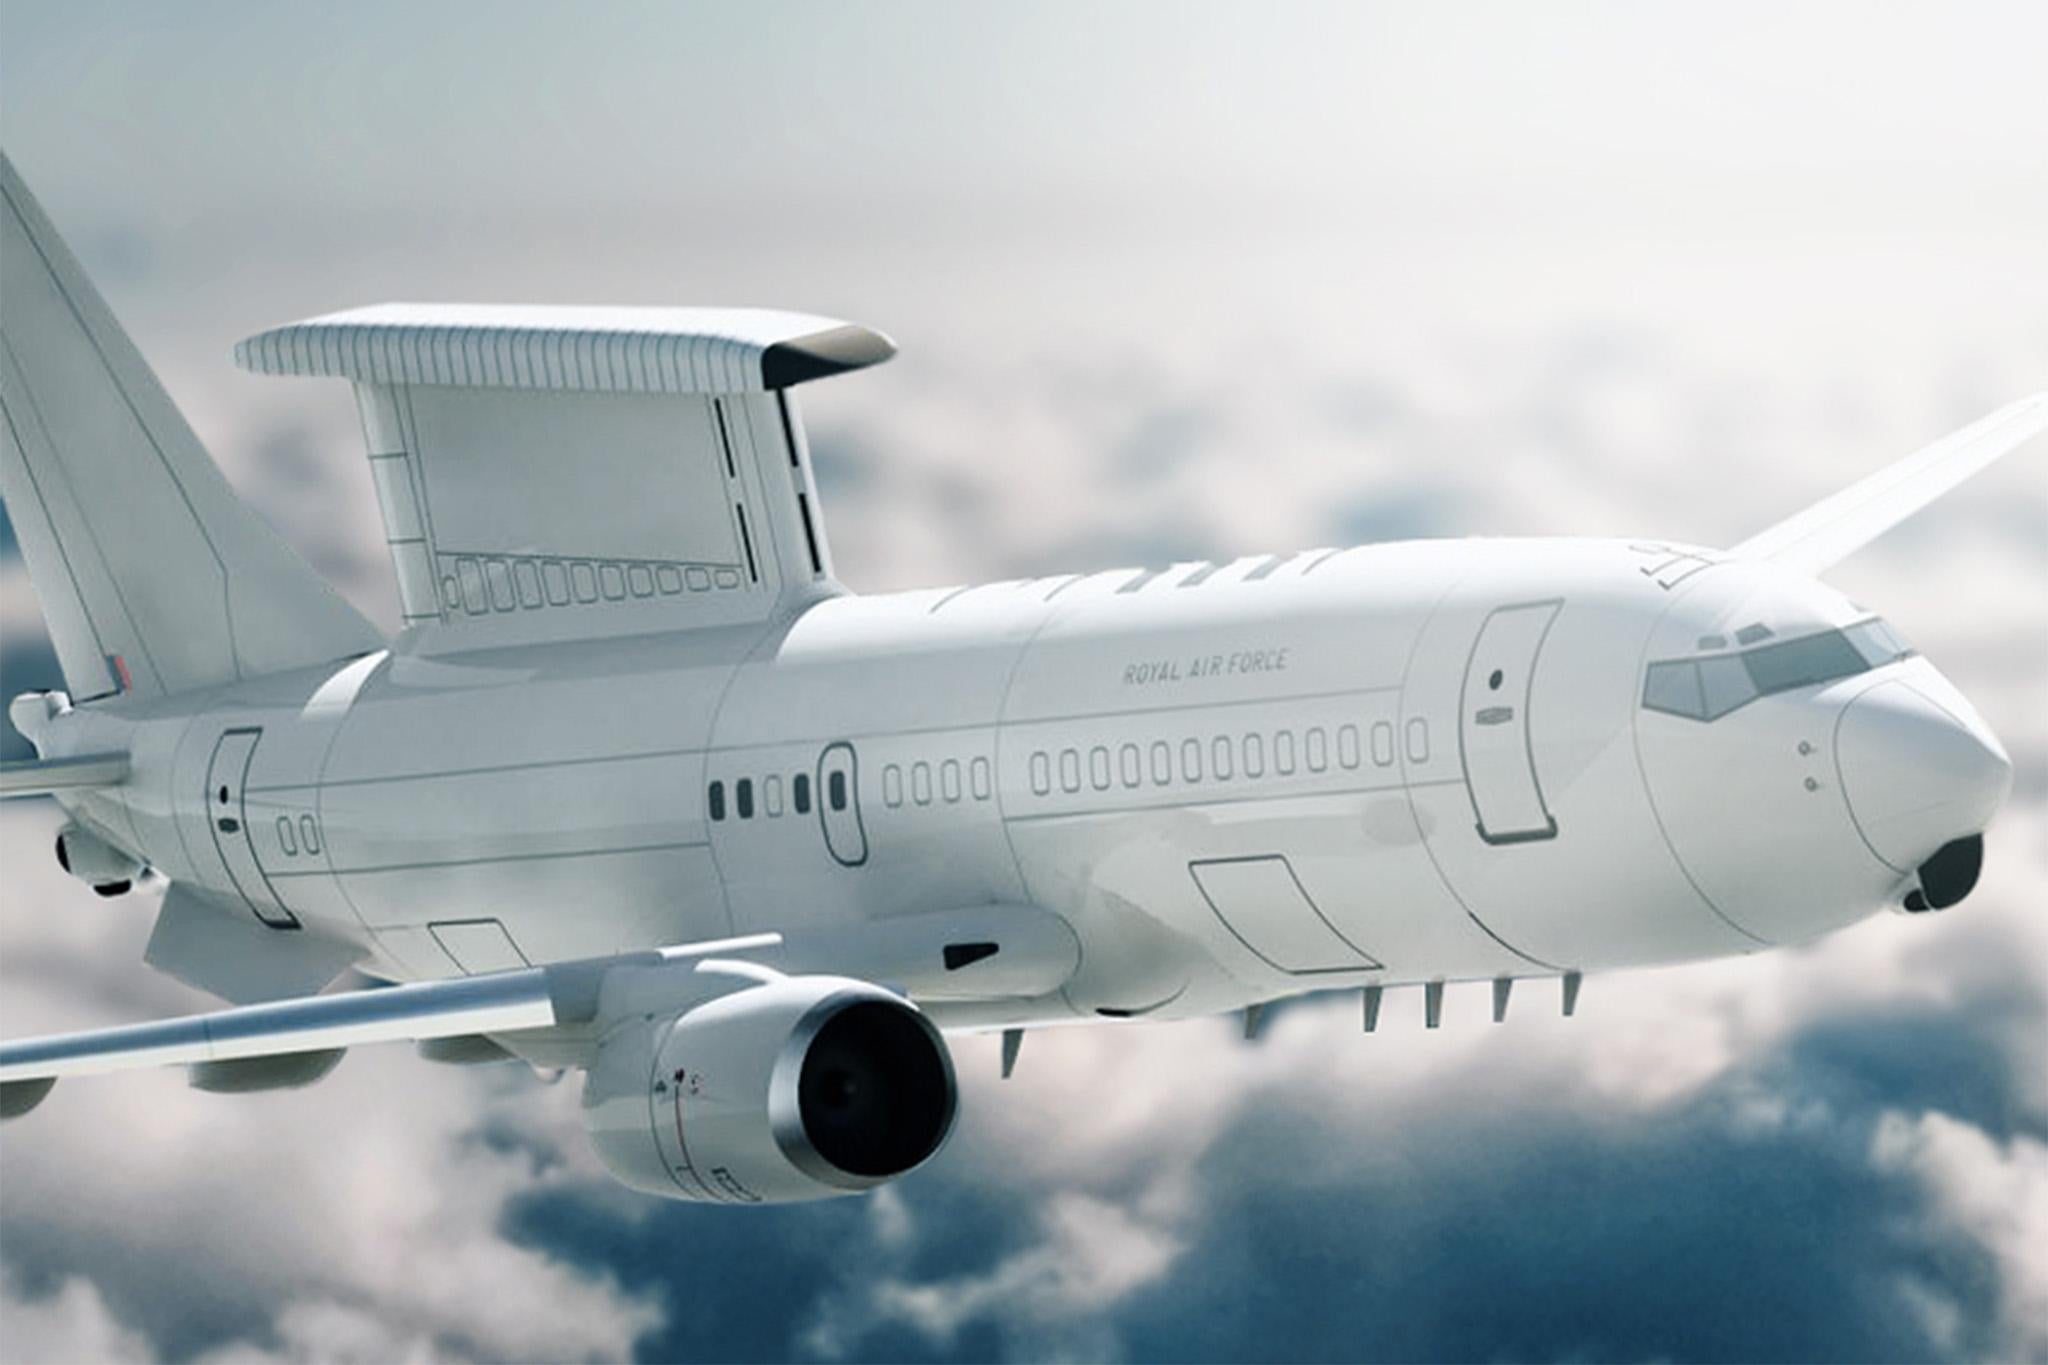 Artist impression of an RAF E-7 Wedgetail, Ministry of Defence